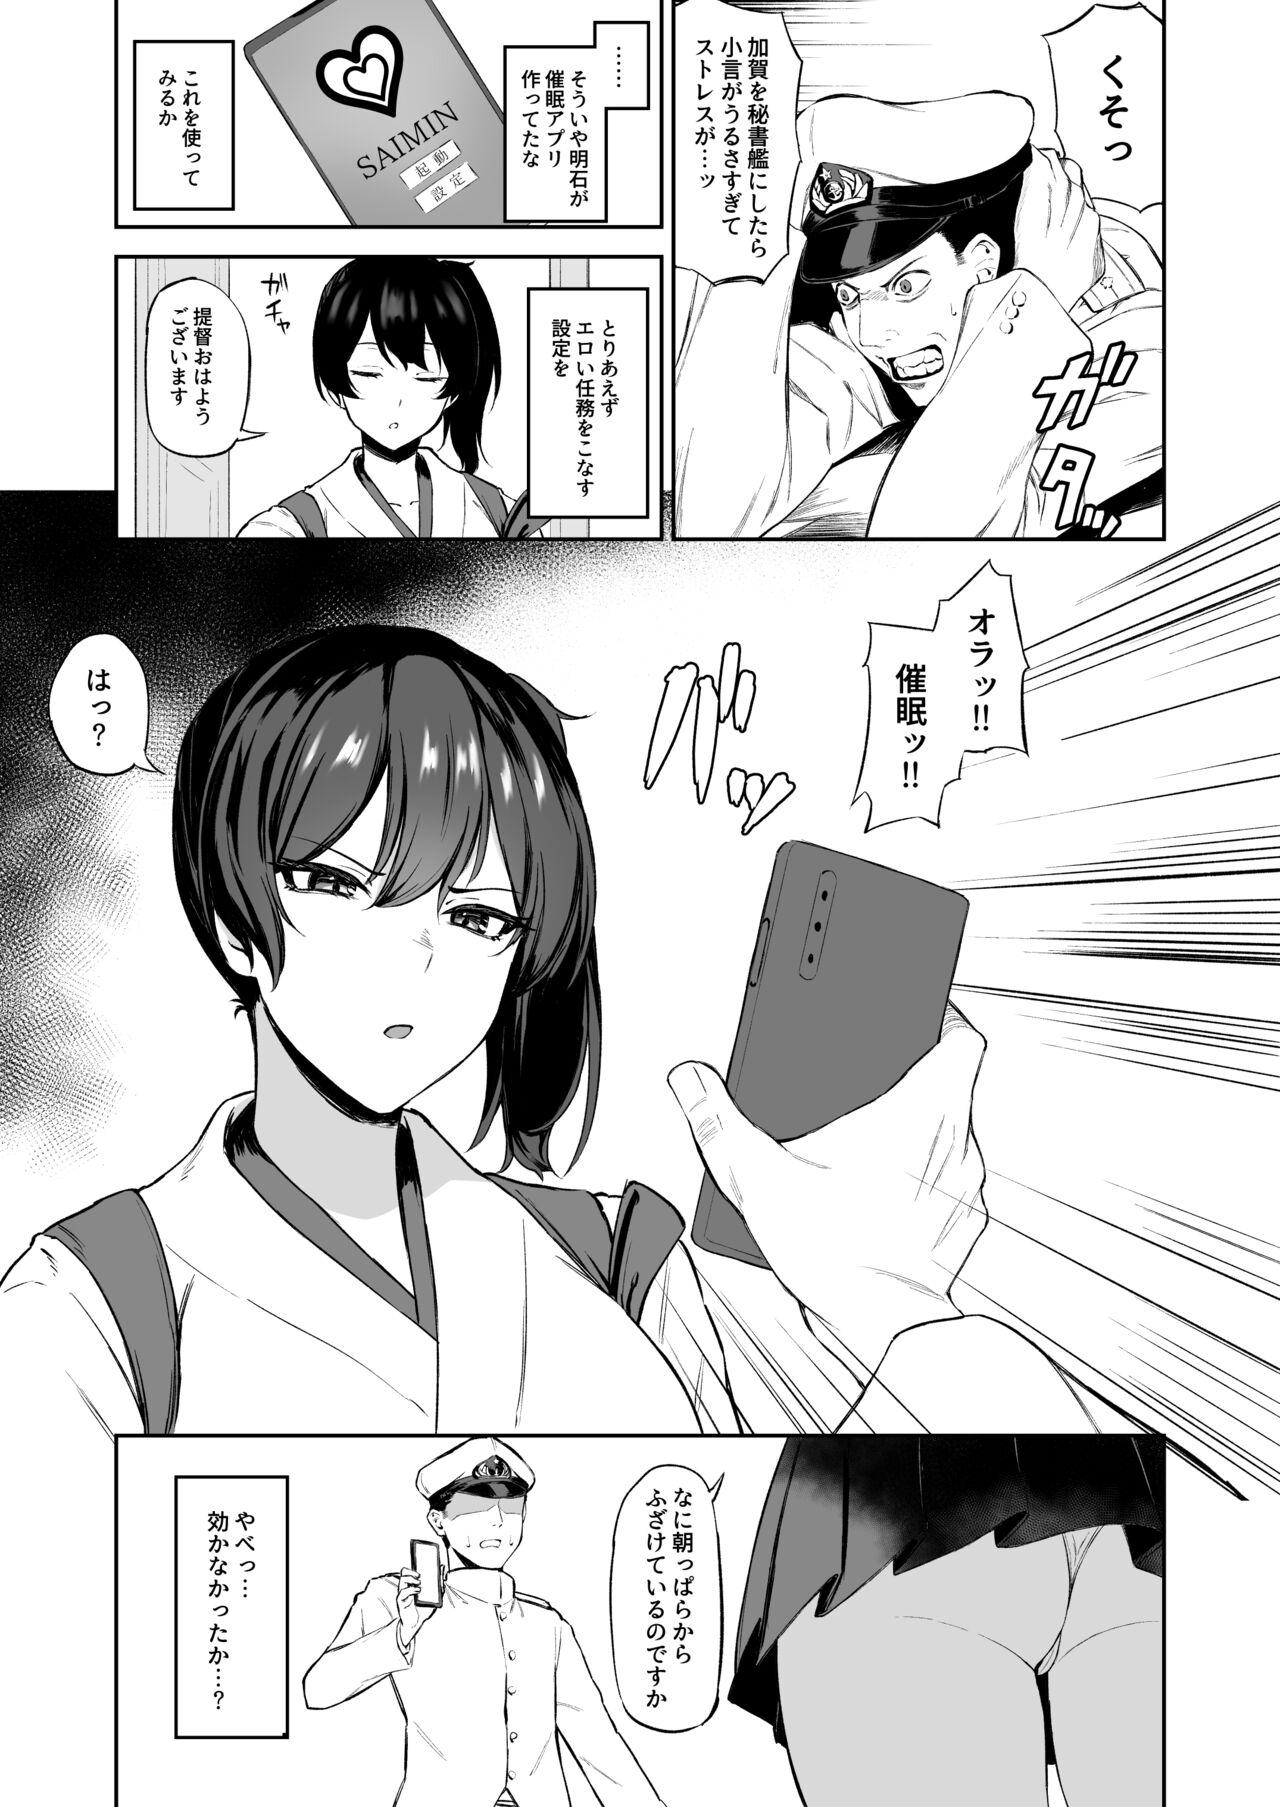 Massages 催眠加賀さん - Kantai collection Hiddencam - Page 2